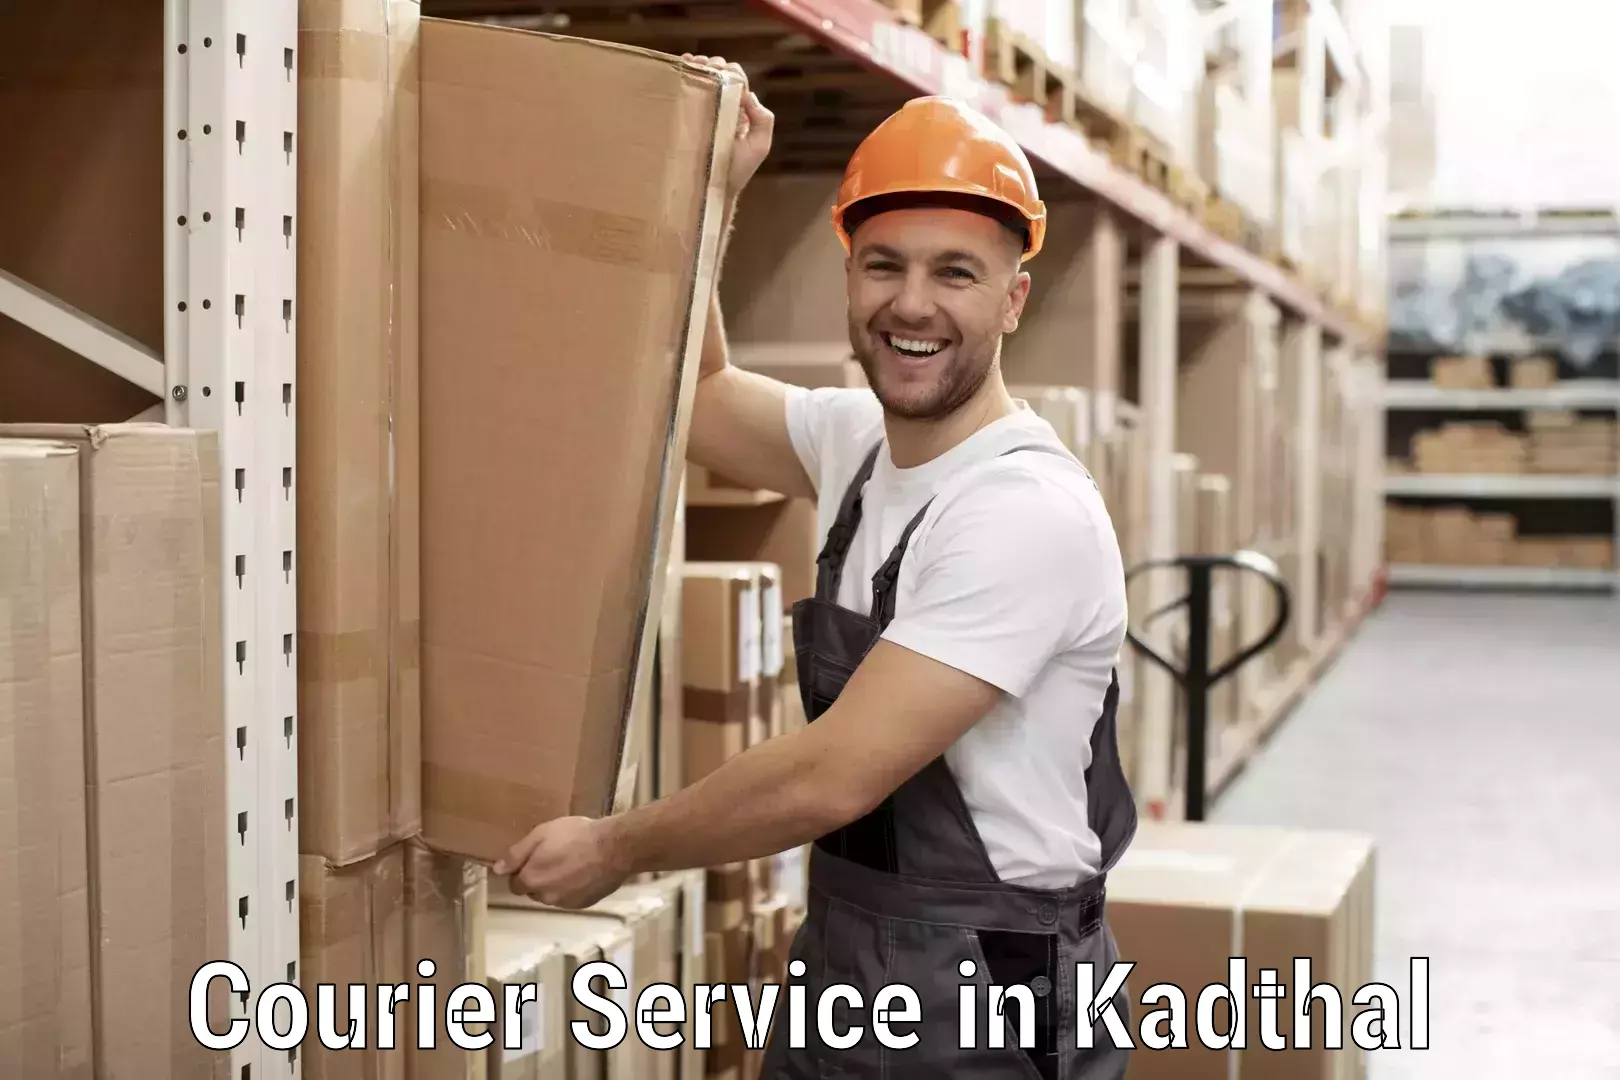 User-friendly courier app in Kadthal